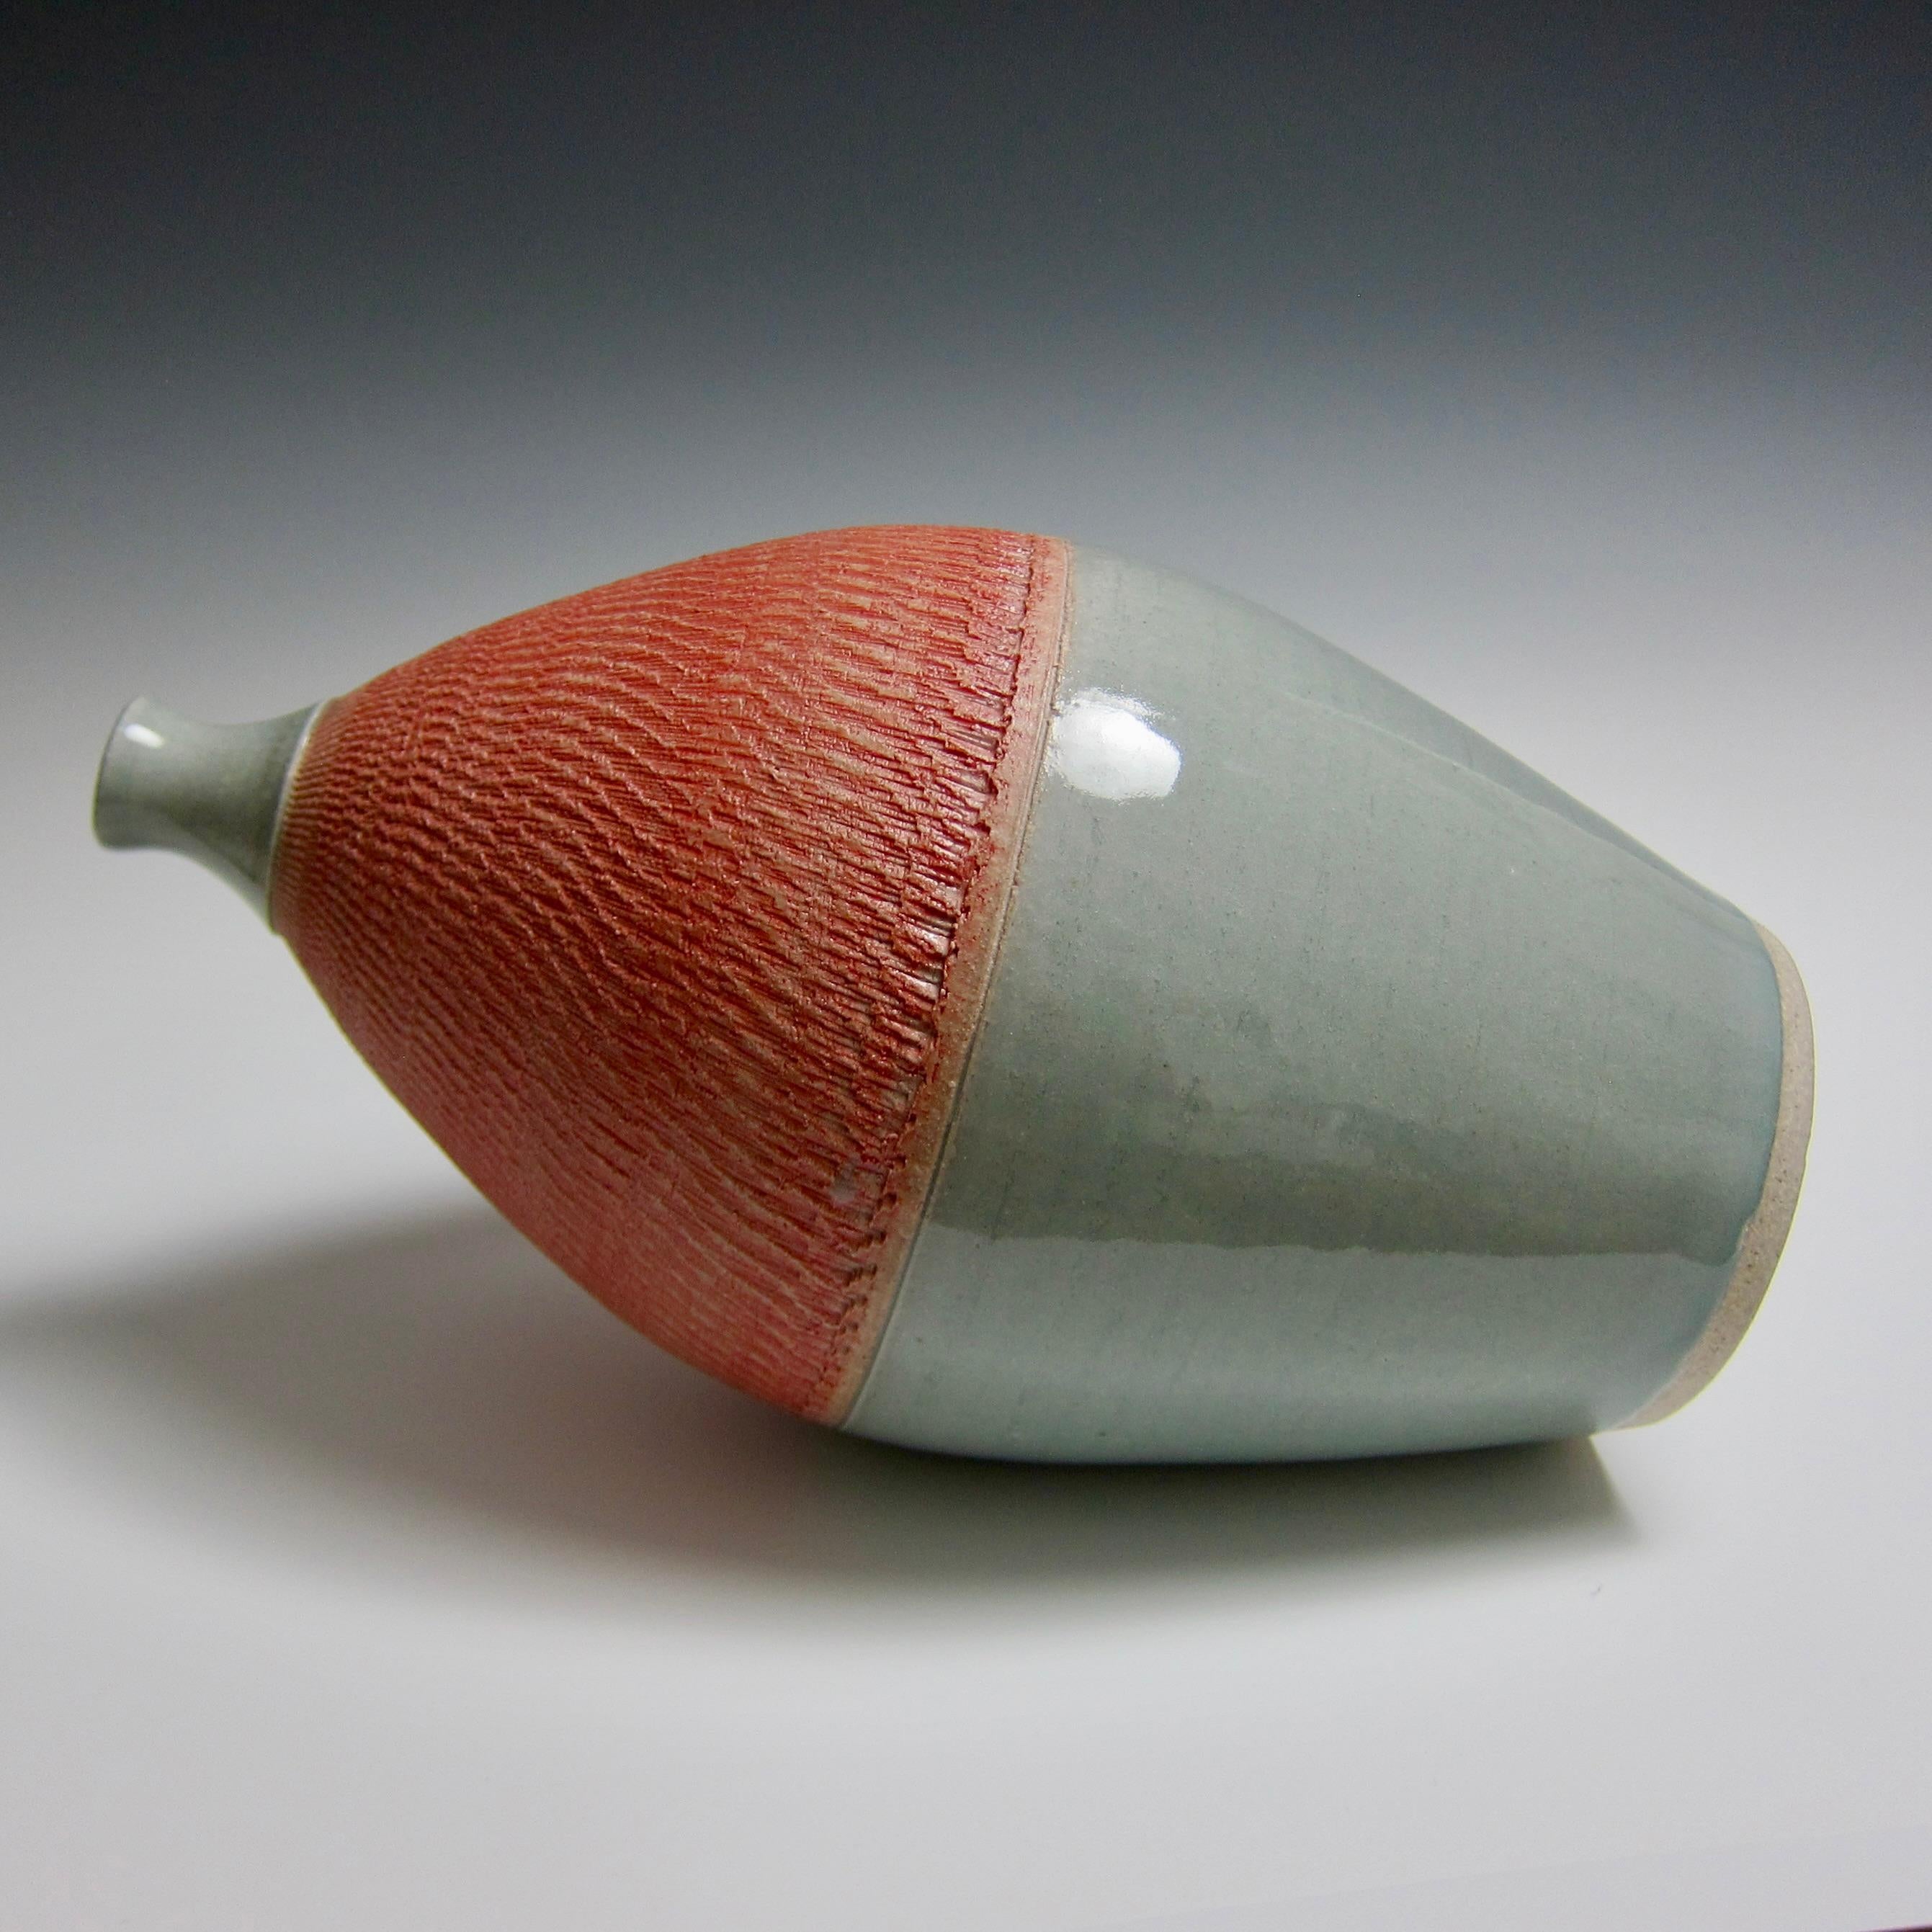 chattering pottery